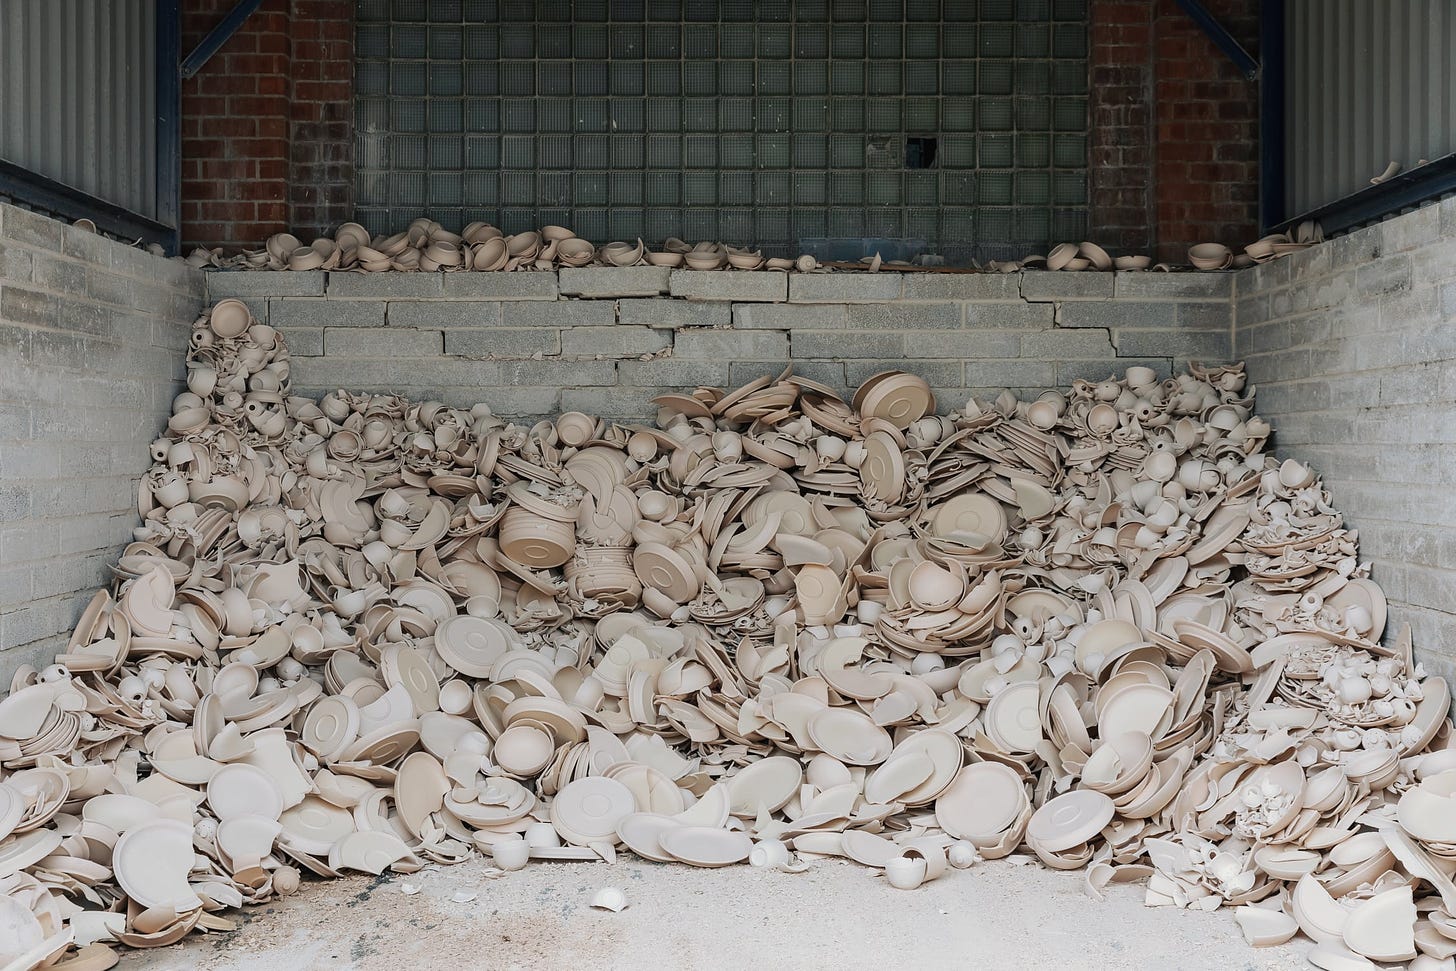 Remnants of pottery are piled up against a wall.